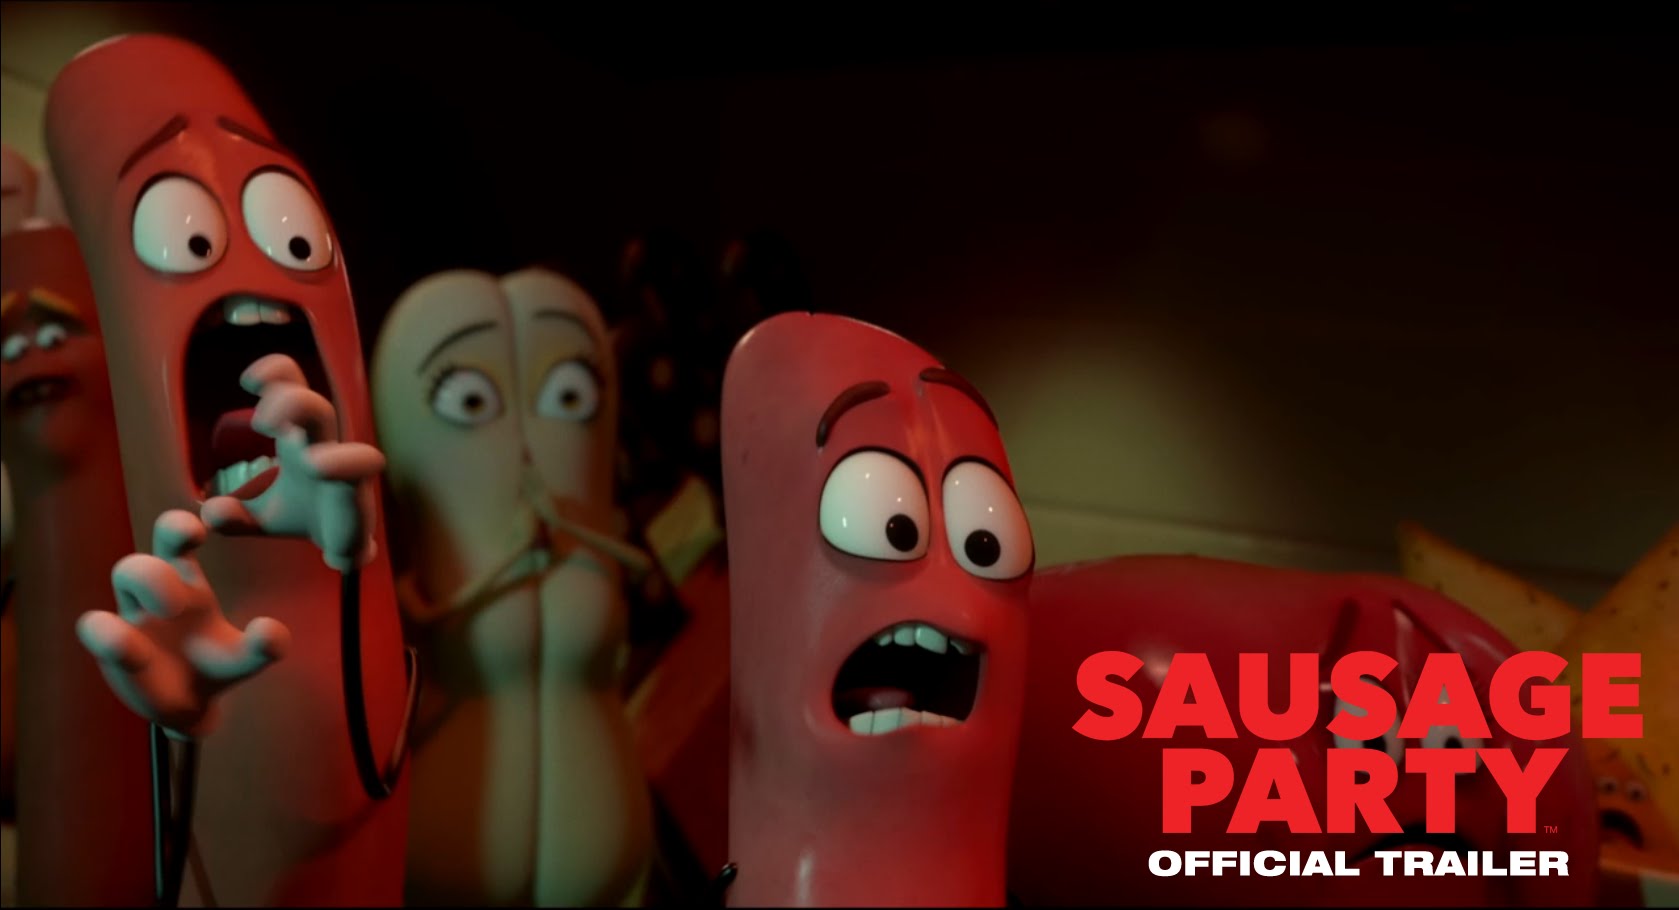 Sausage Party #3